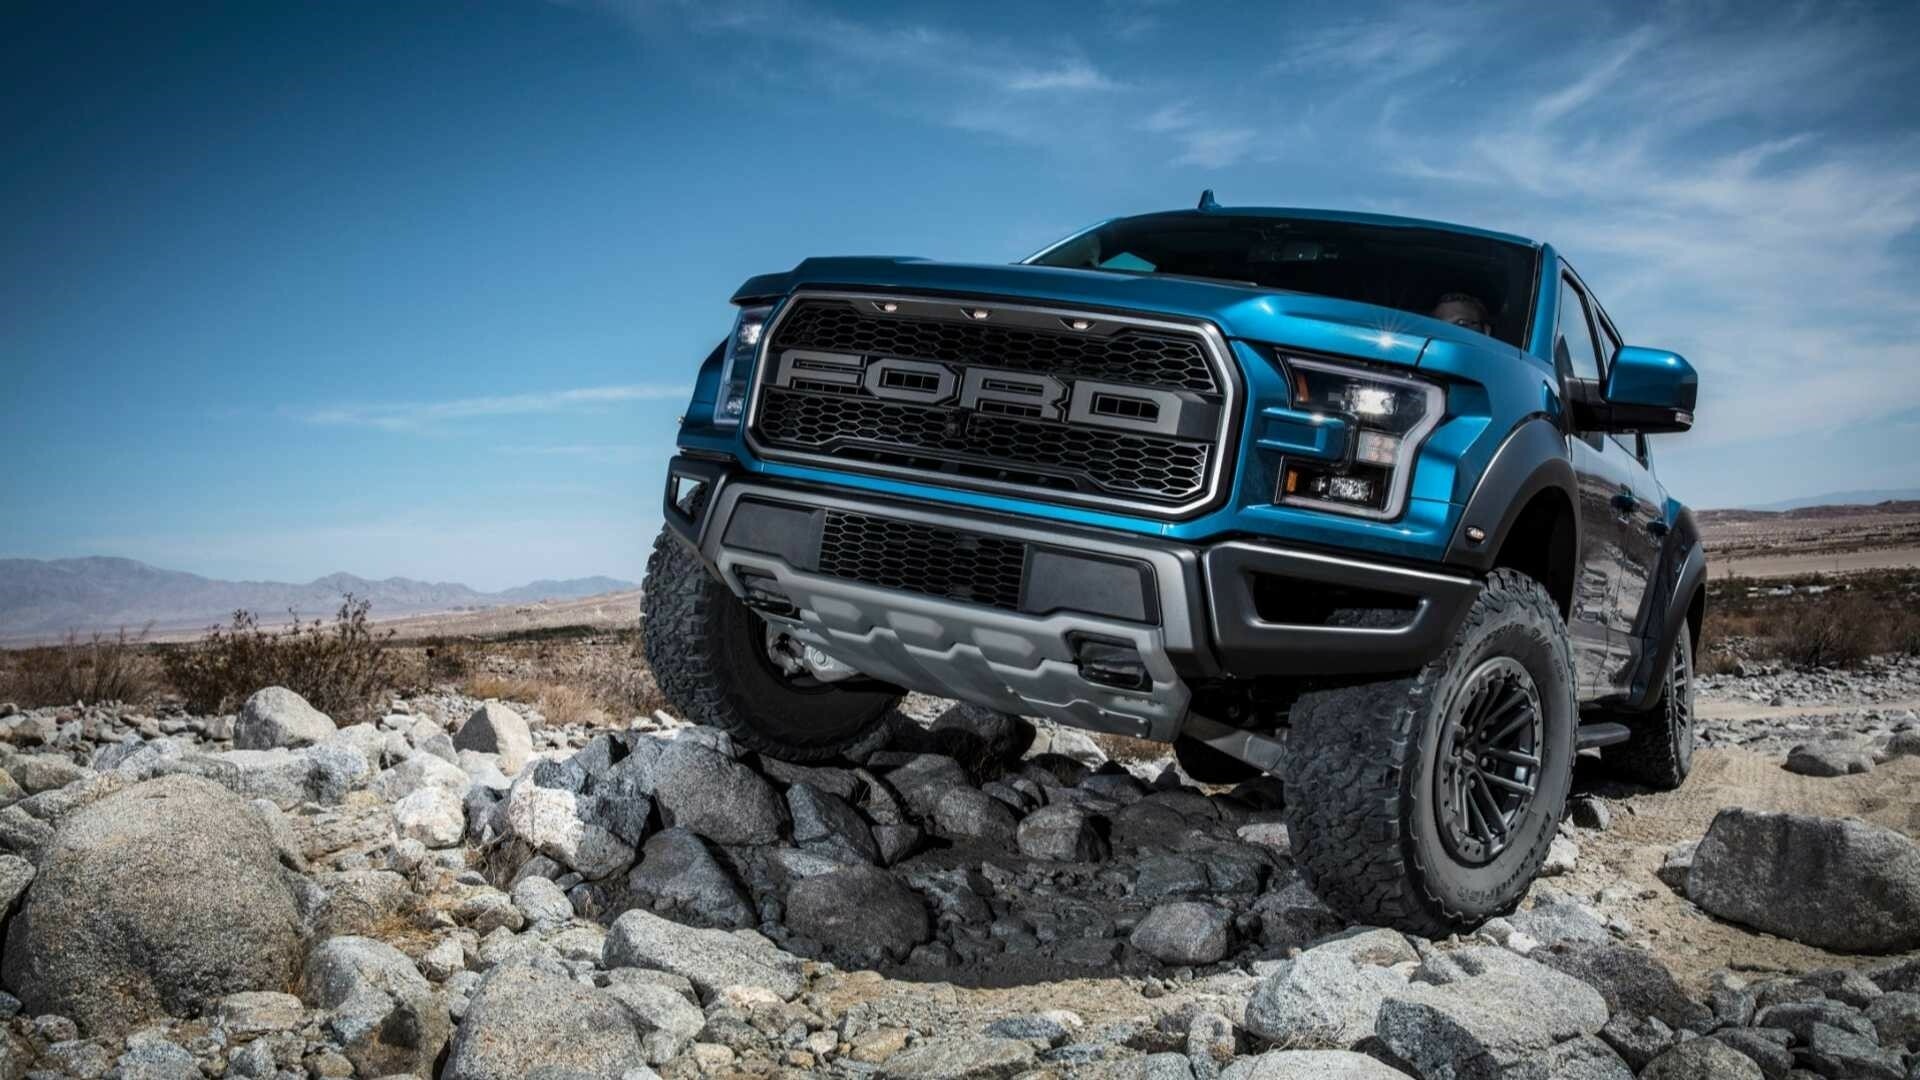 Ford: The Raptor, A nameplate used for "high-performance" pickup trucks and SUVs. 1920x1080 Full HD Wallpaper.